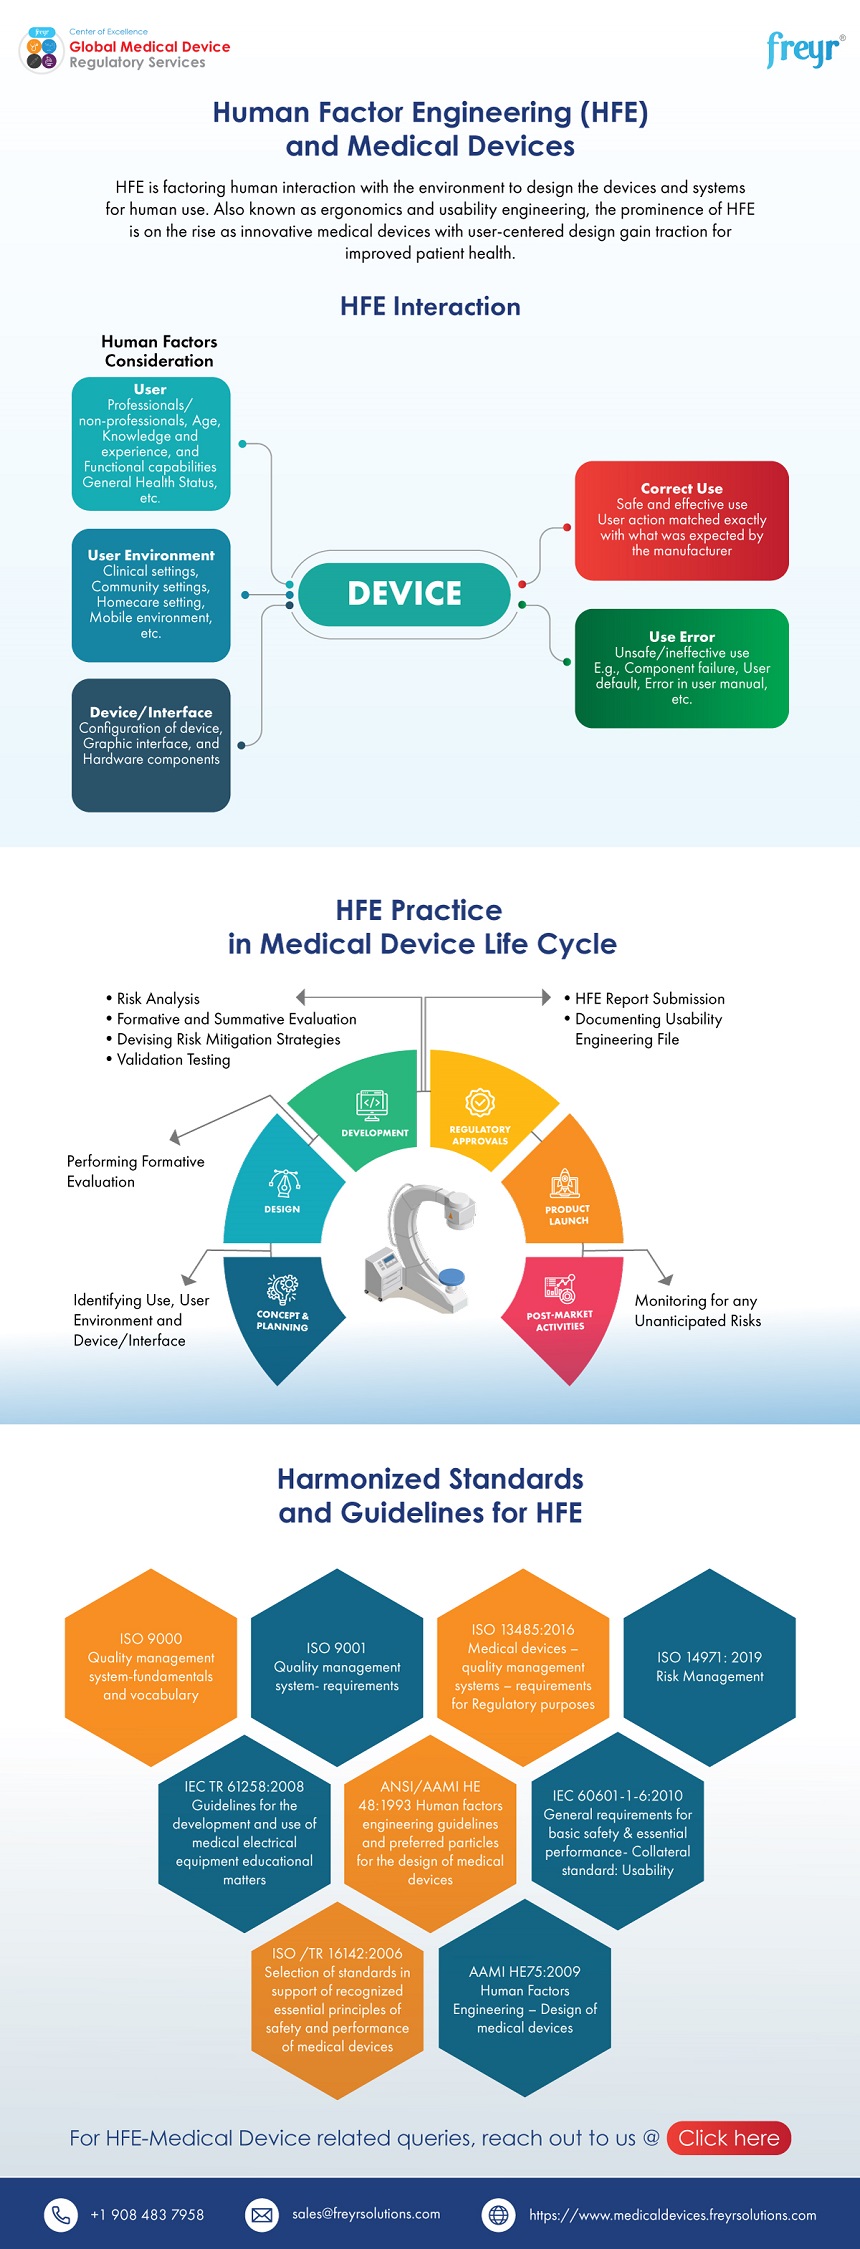 Human Factor Engineering (HFE) and Medical Devices